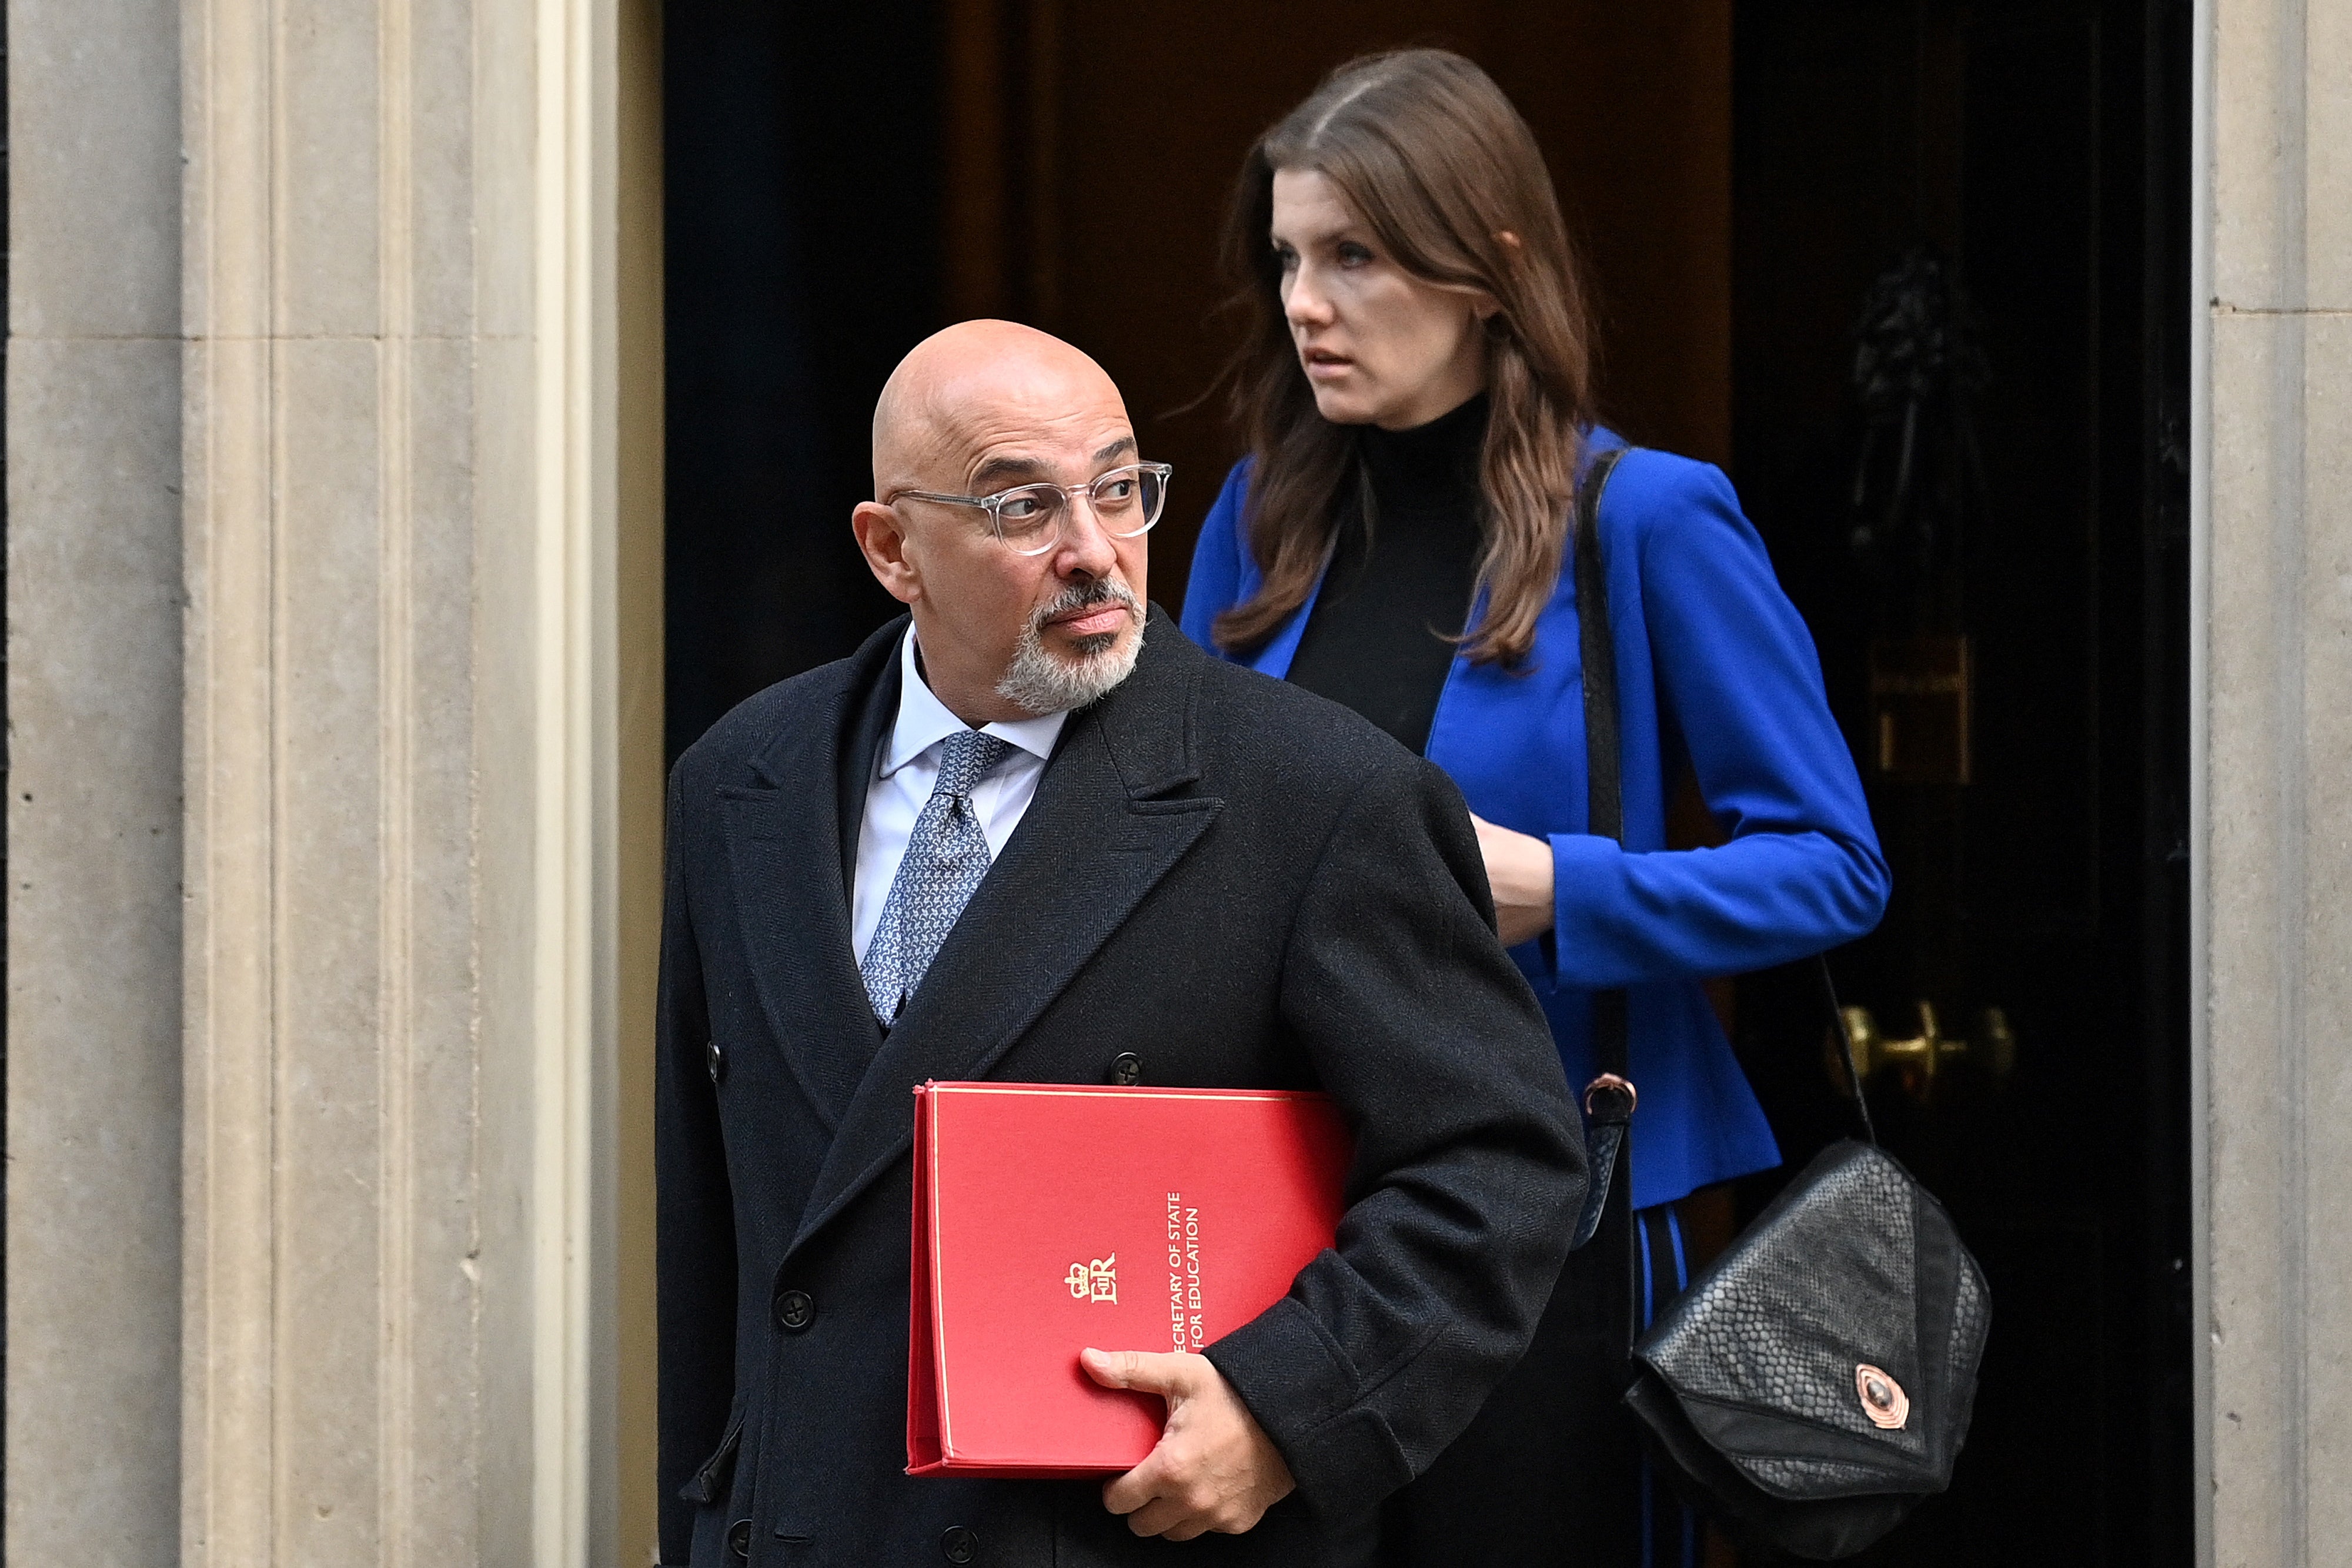 nadhim zahawi, ‘my mistakes have been mine’: nadhim zahawi, the former tory rising star now on his way out of westminster